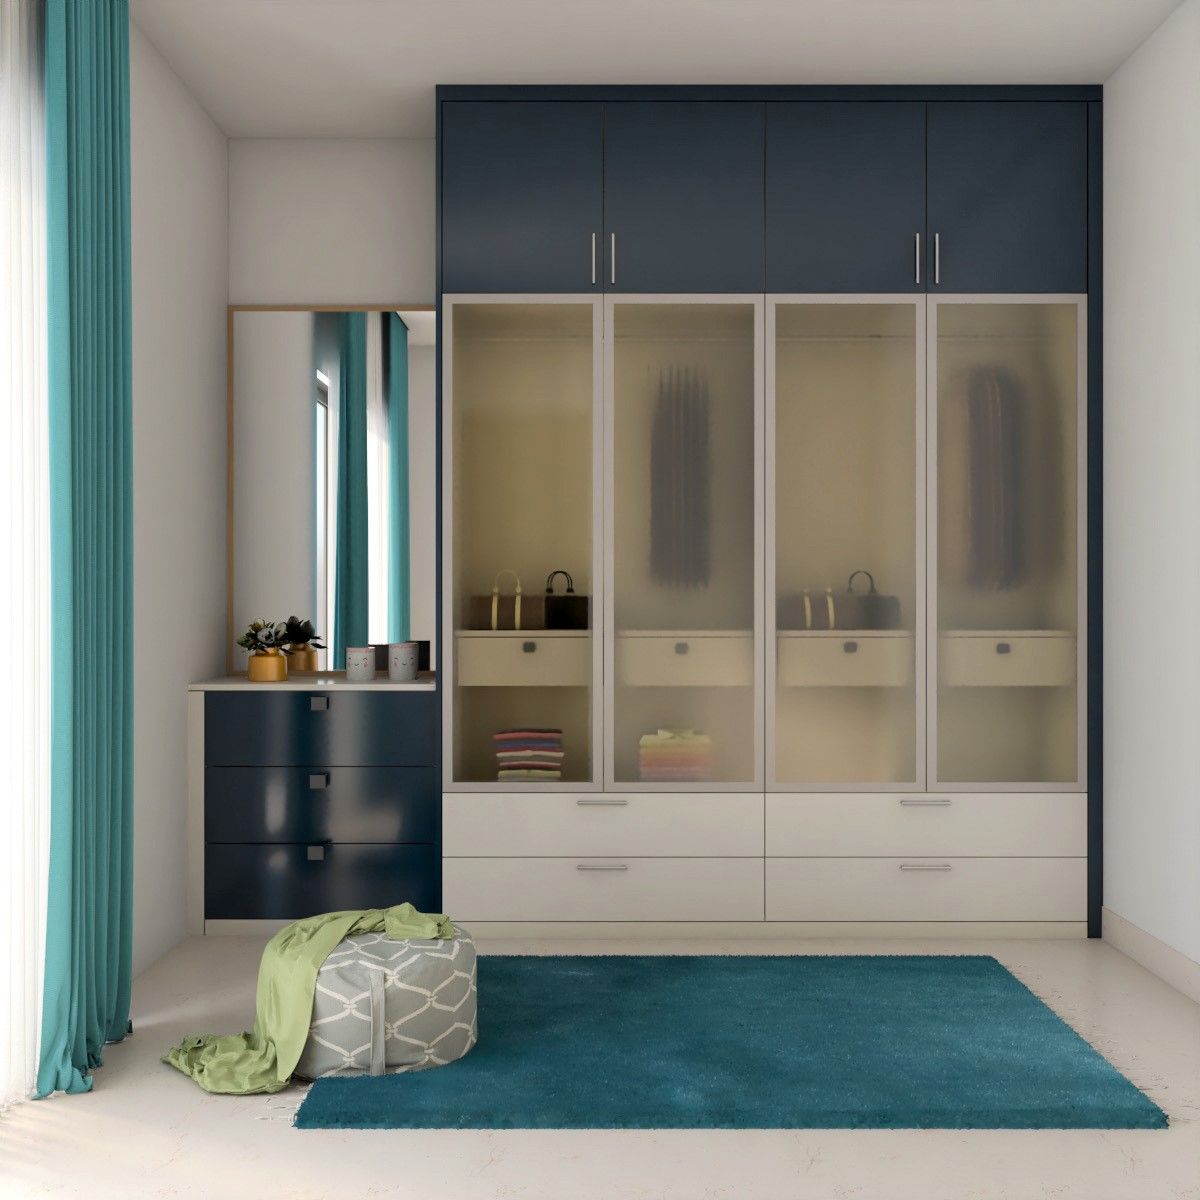 Two-Toned Wardrobe Design with Frosted Glass Door